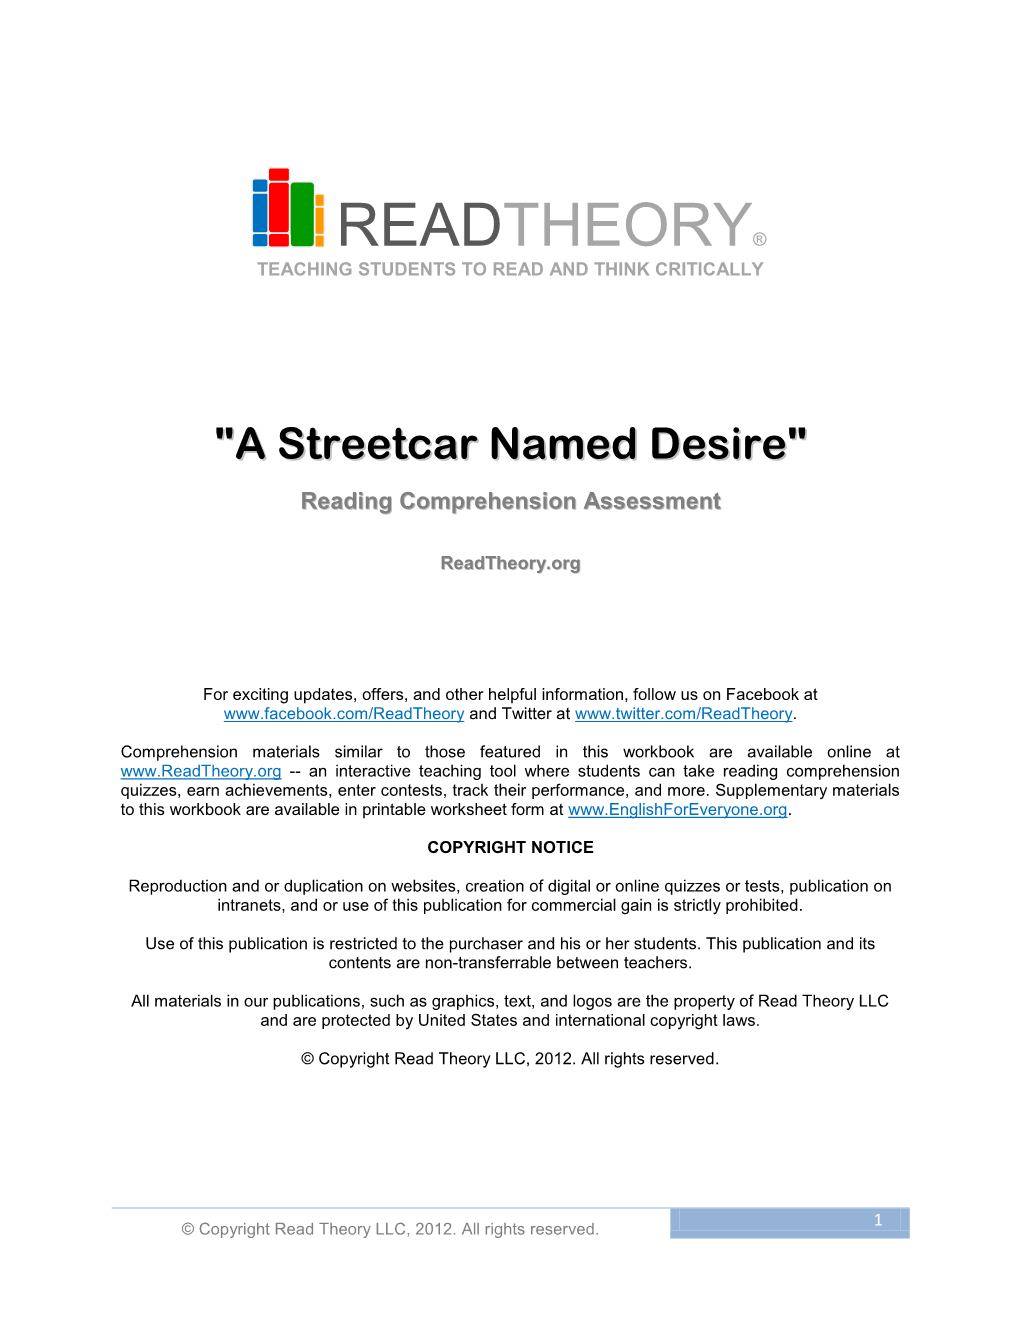 Readtheory® Teaching Students to Read and Think Critically